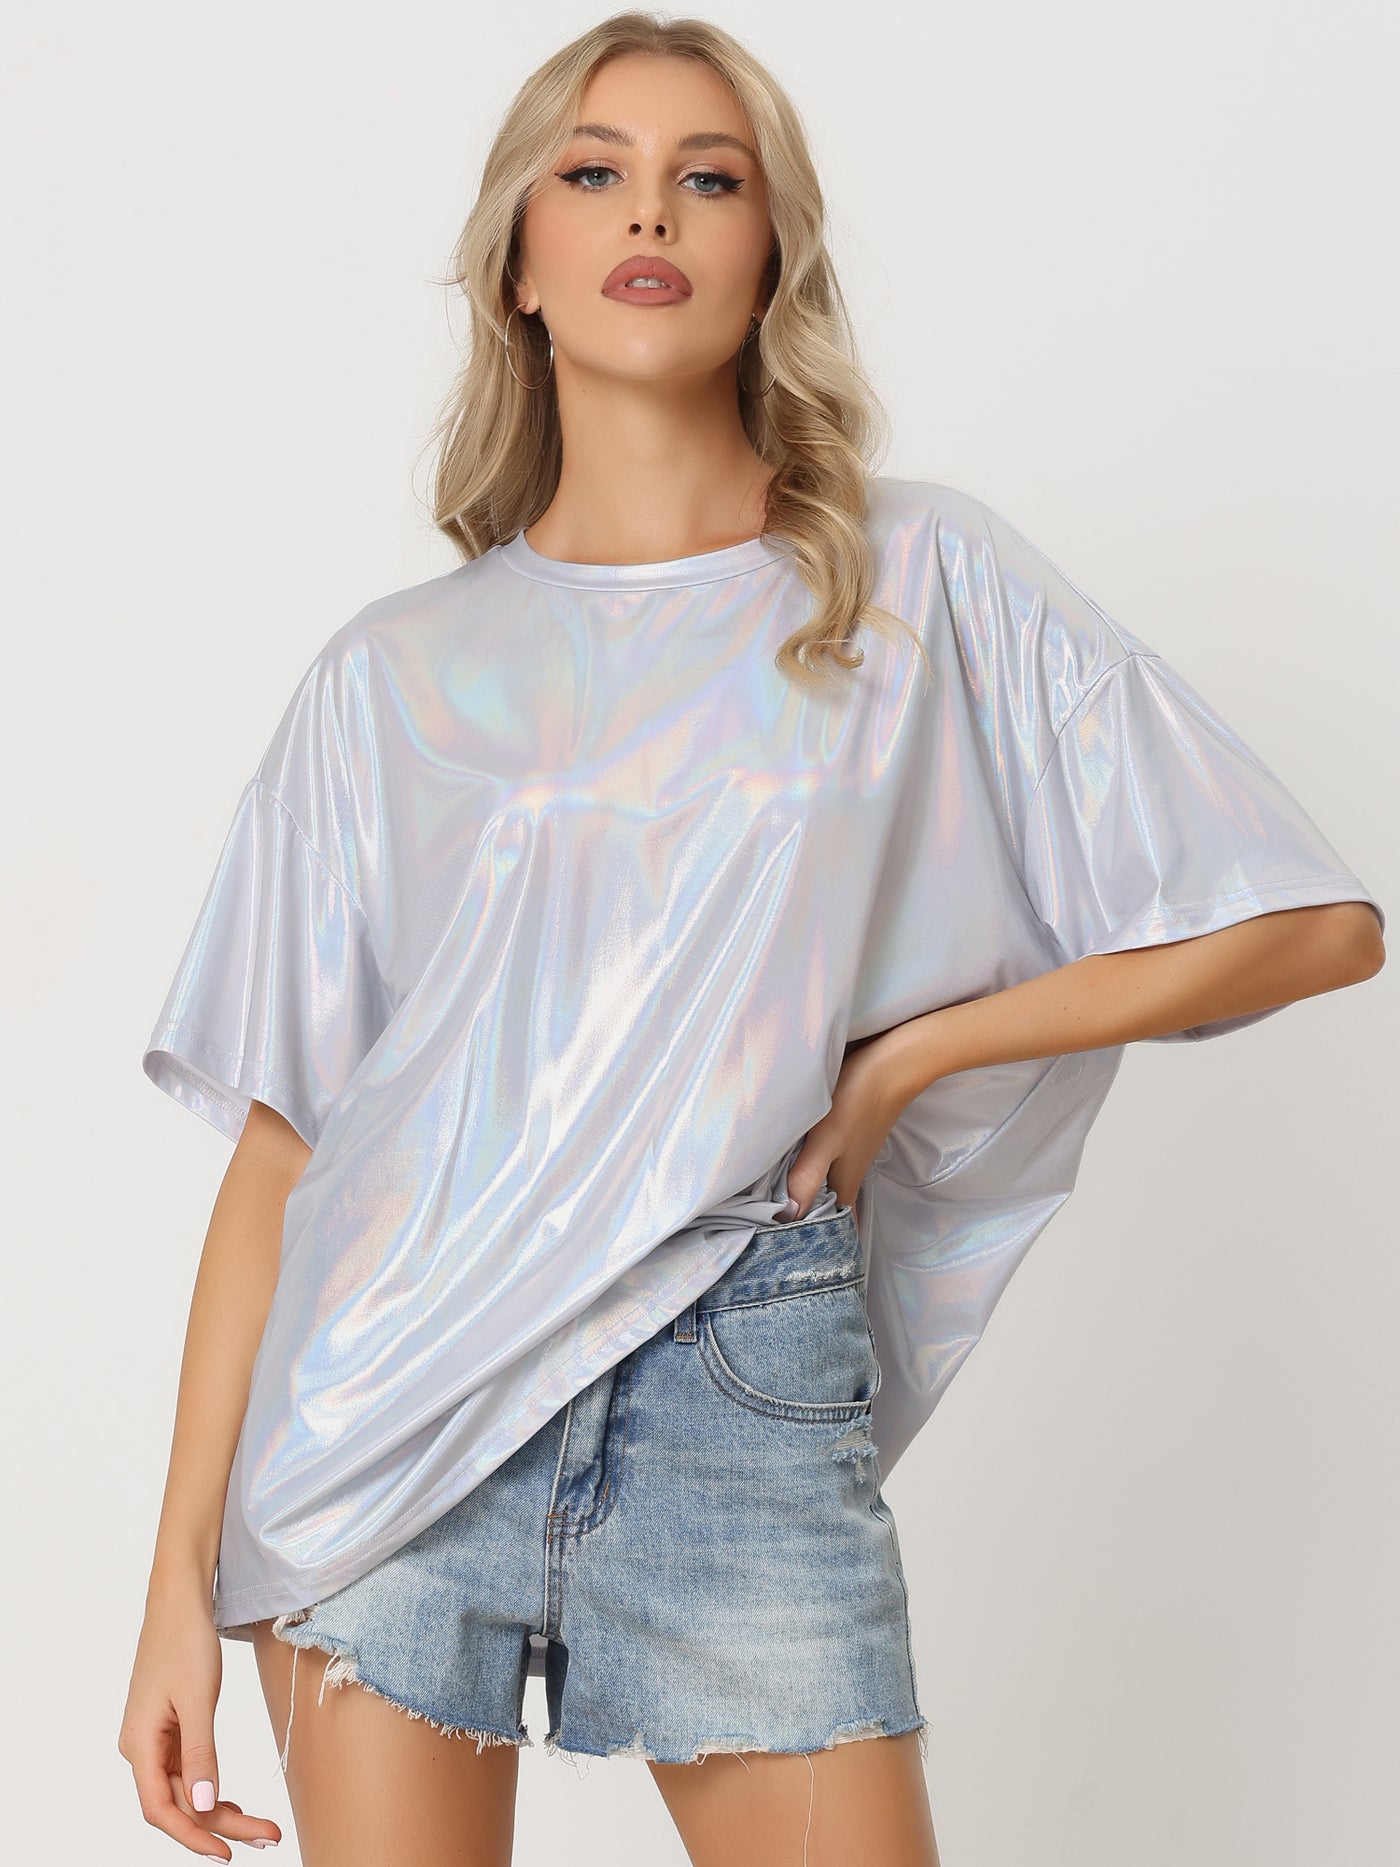 Allegra K Sparkly Short Sleeve Holographic Party Metallic T-Shirt Top